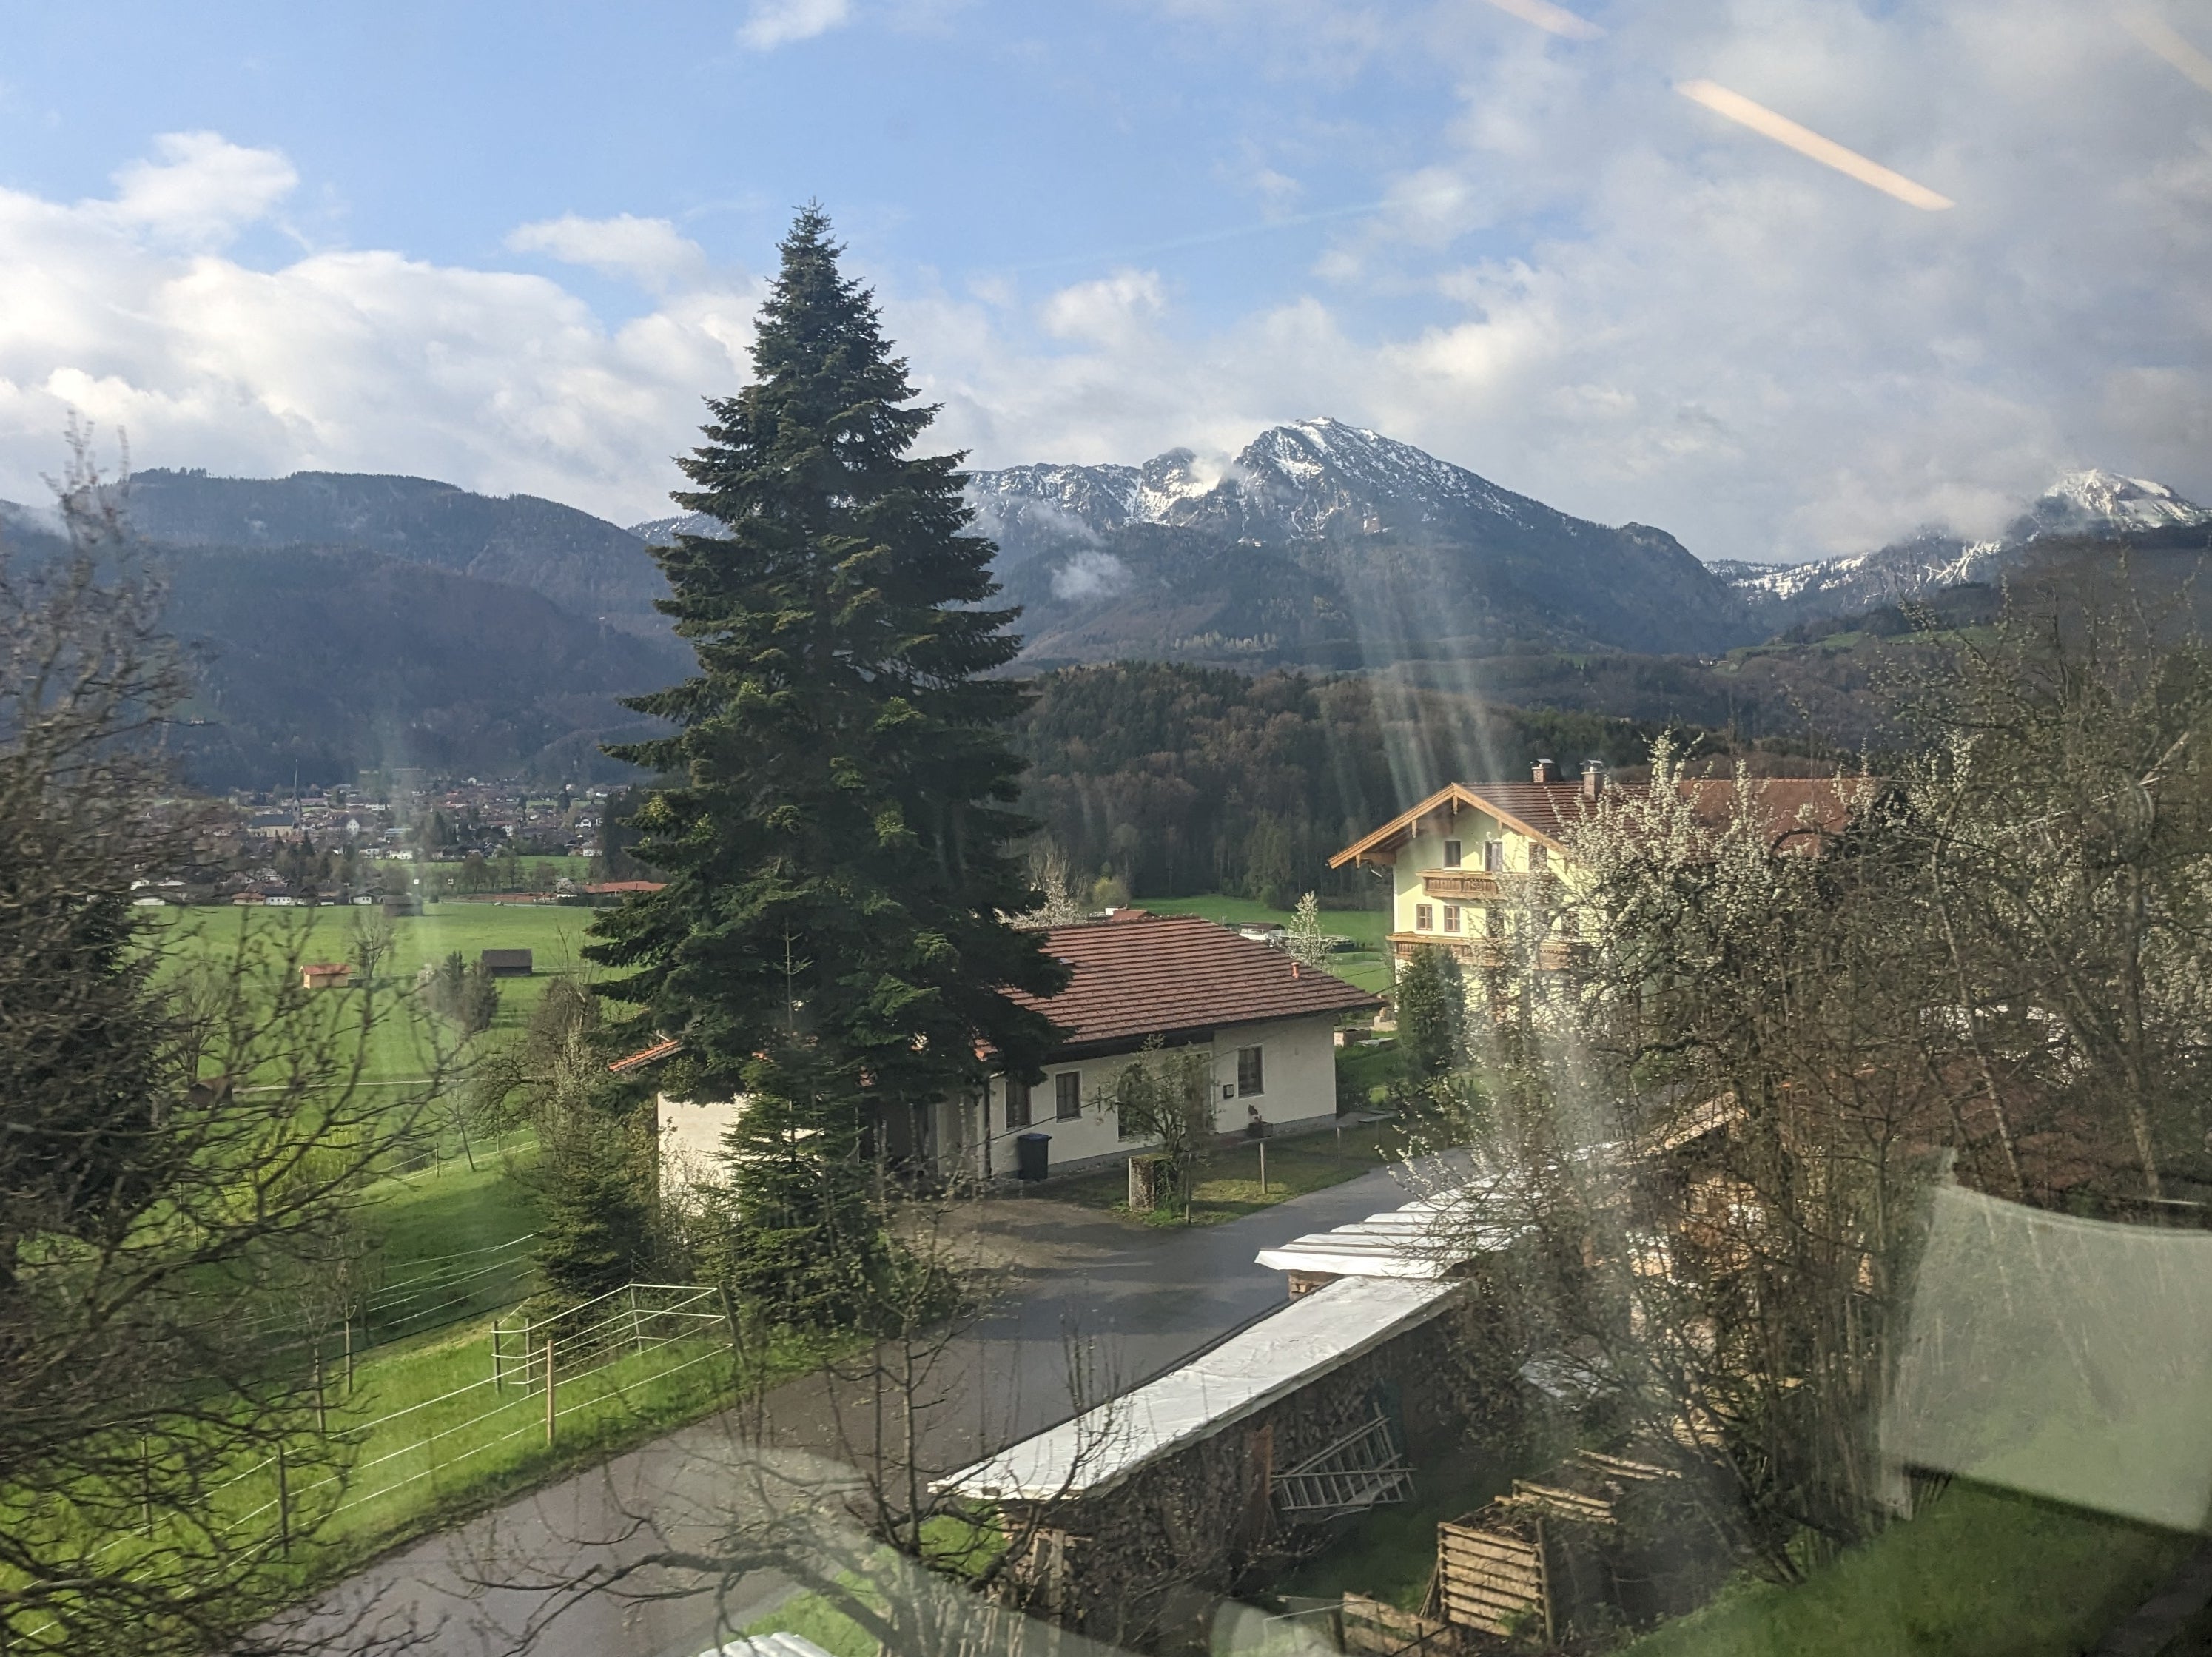 Train with a view: The Austrian countryside whizzing past the carriage window